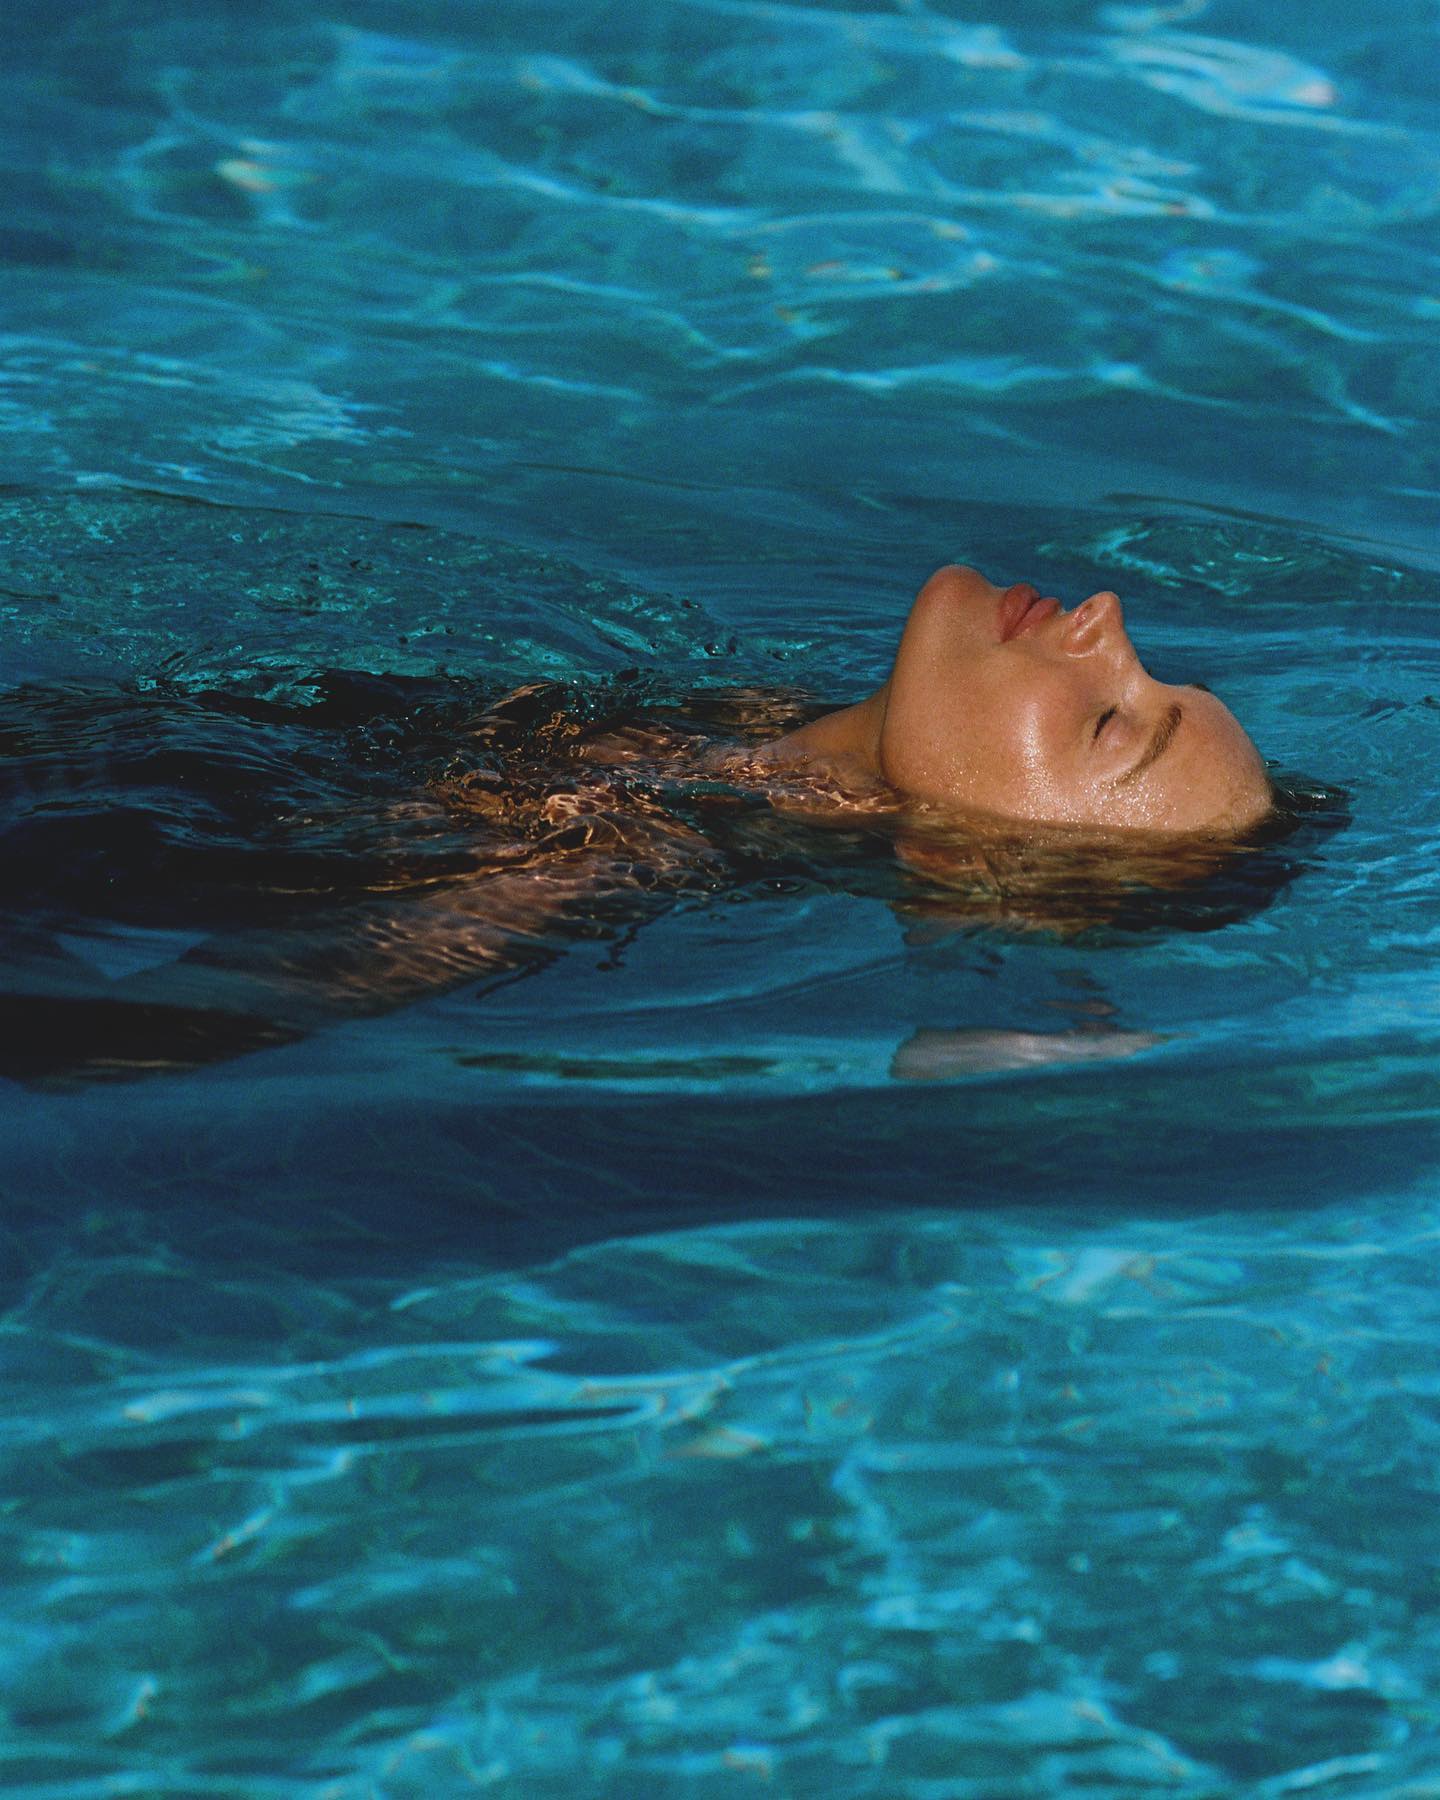 Elsa Hosk Takes a Dip with Lavarice! - Photo 9